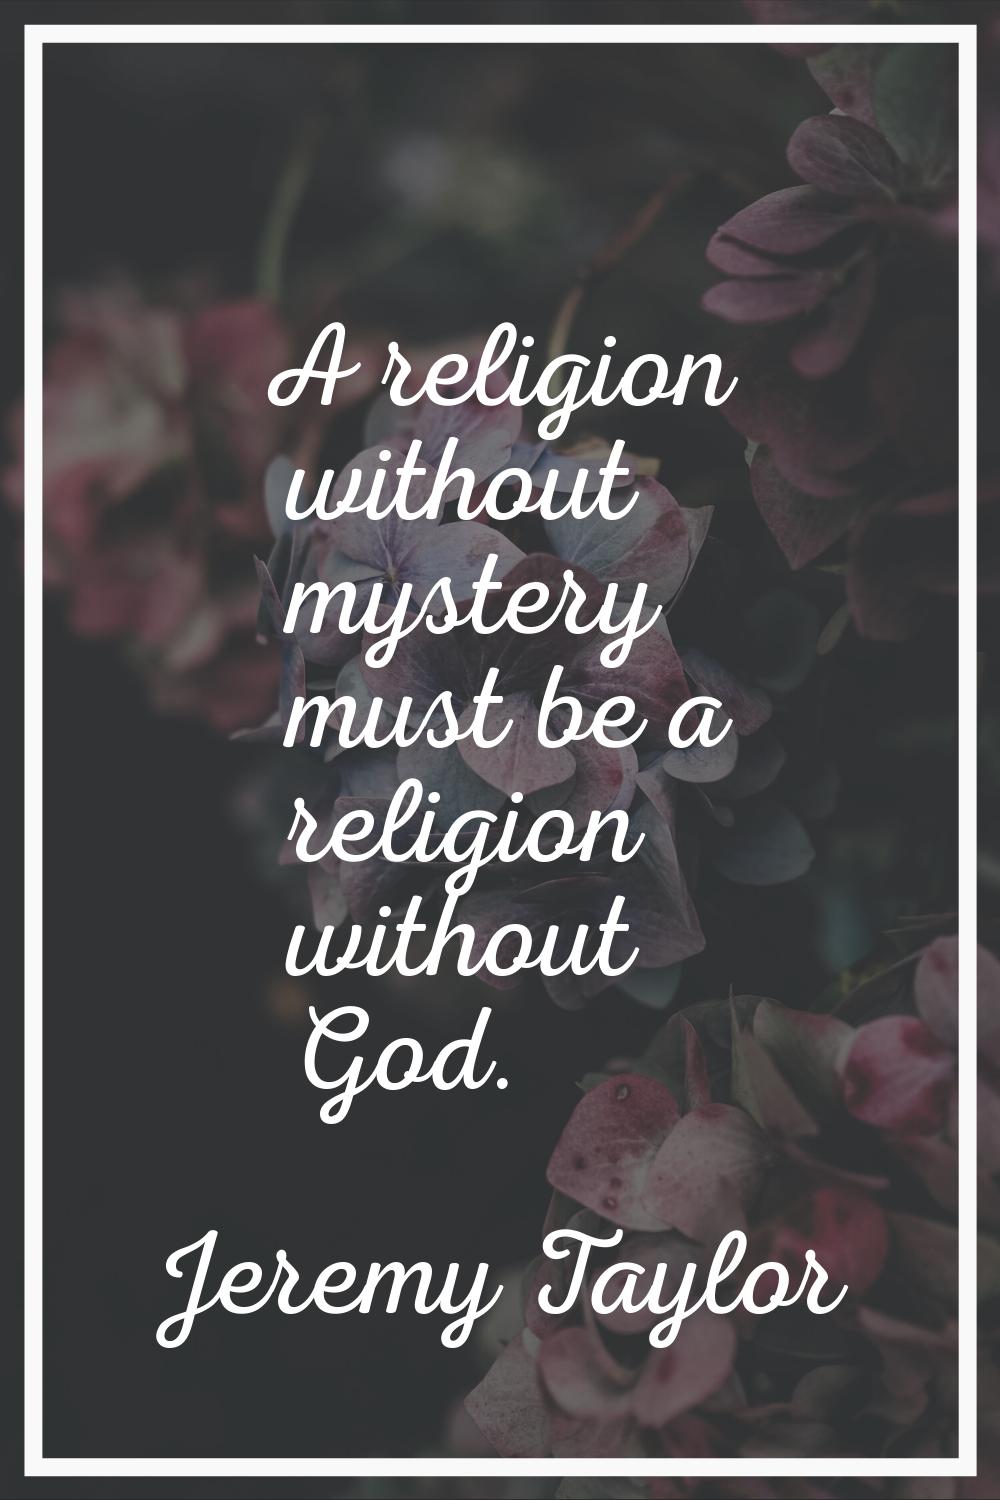 A religion without mystery must be a religion without God.